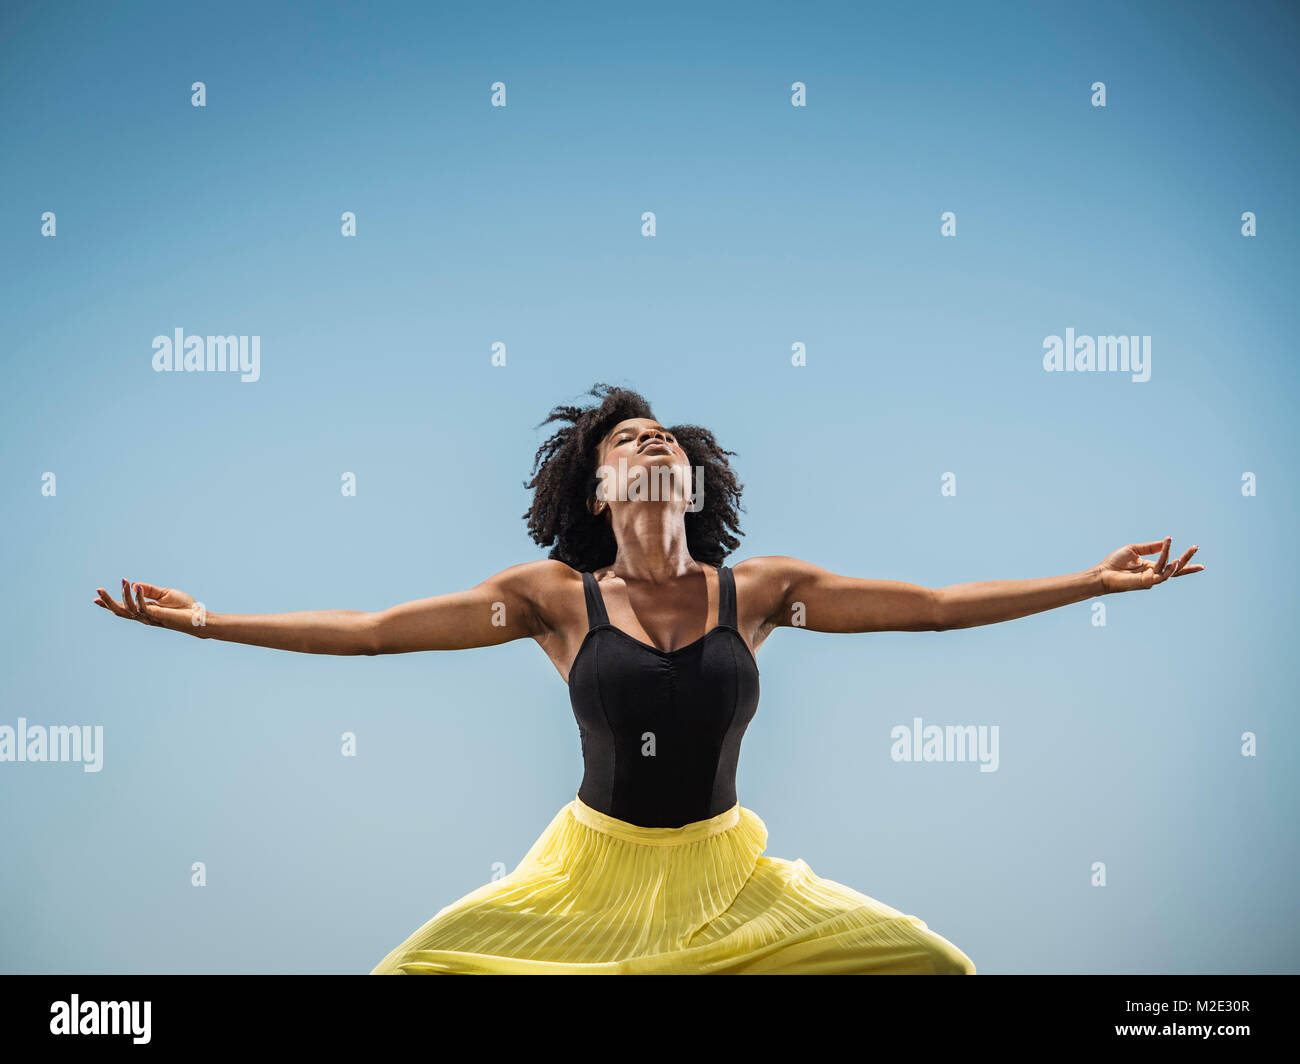 Black woman dancing with arms outstretched Stock Photo